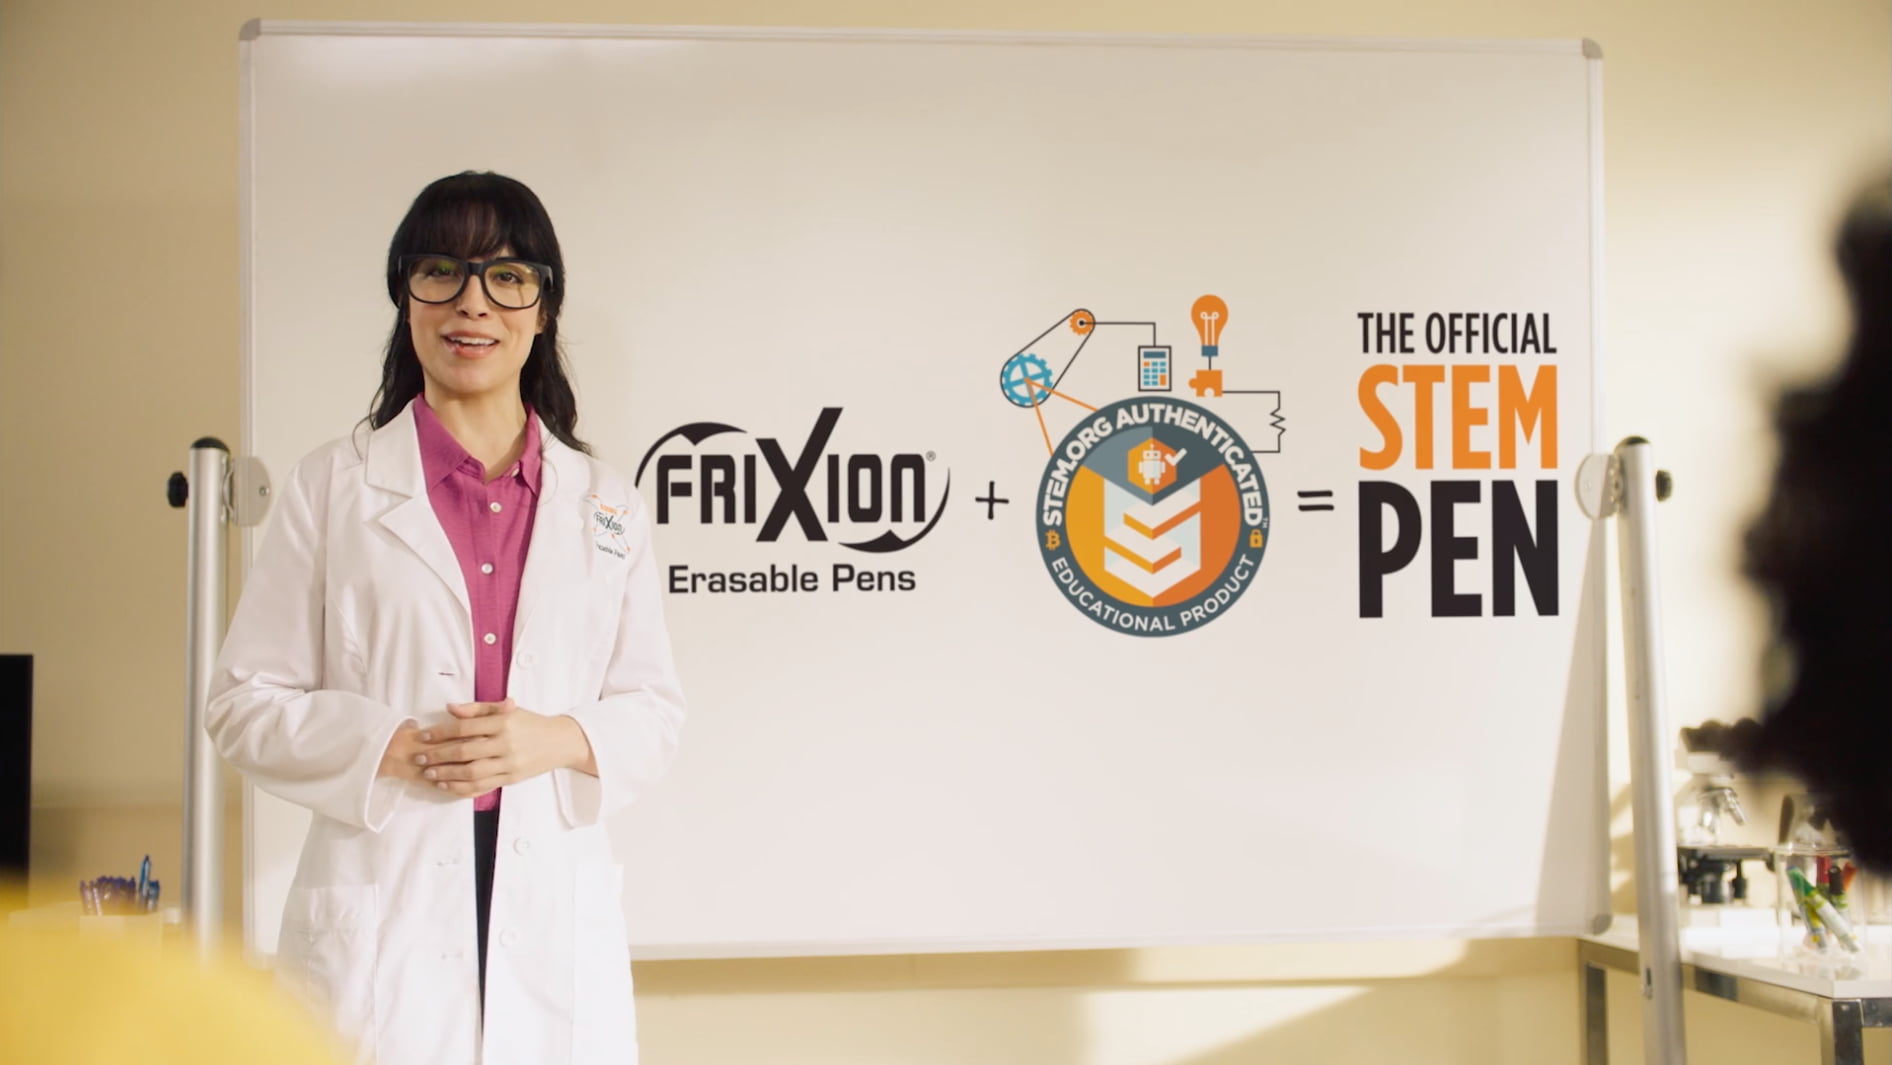 FRIXION, THE FIRST AND ONLY STEM PEN, LAUNCHES THE FRIXION FOR GOOD  CAMPAIGN SUPPORTING GIRLS WHO CODE